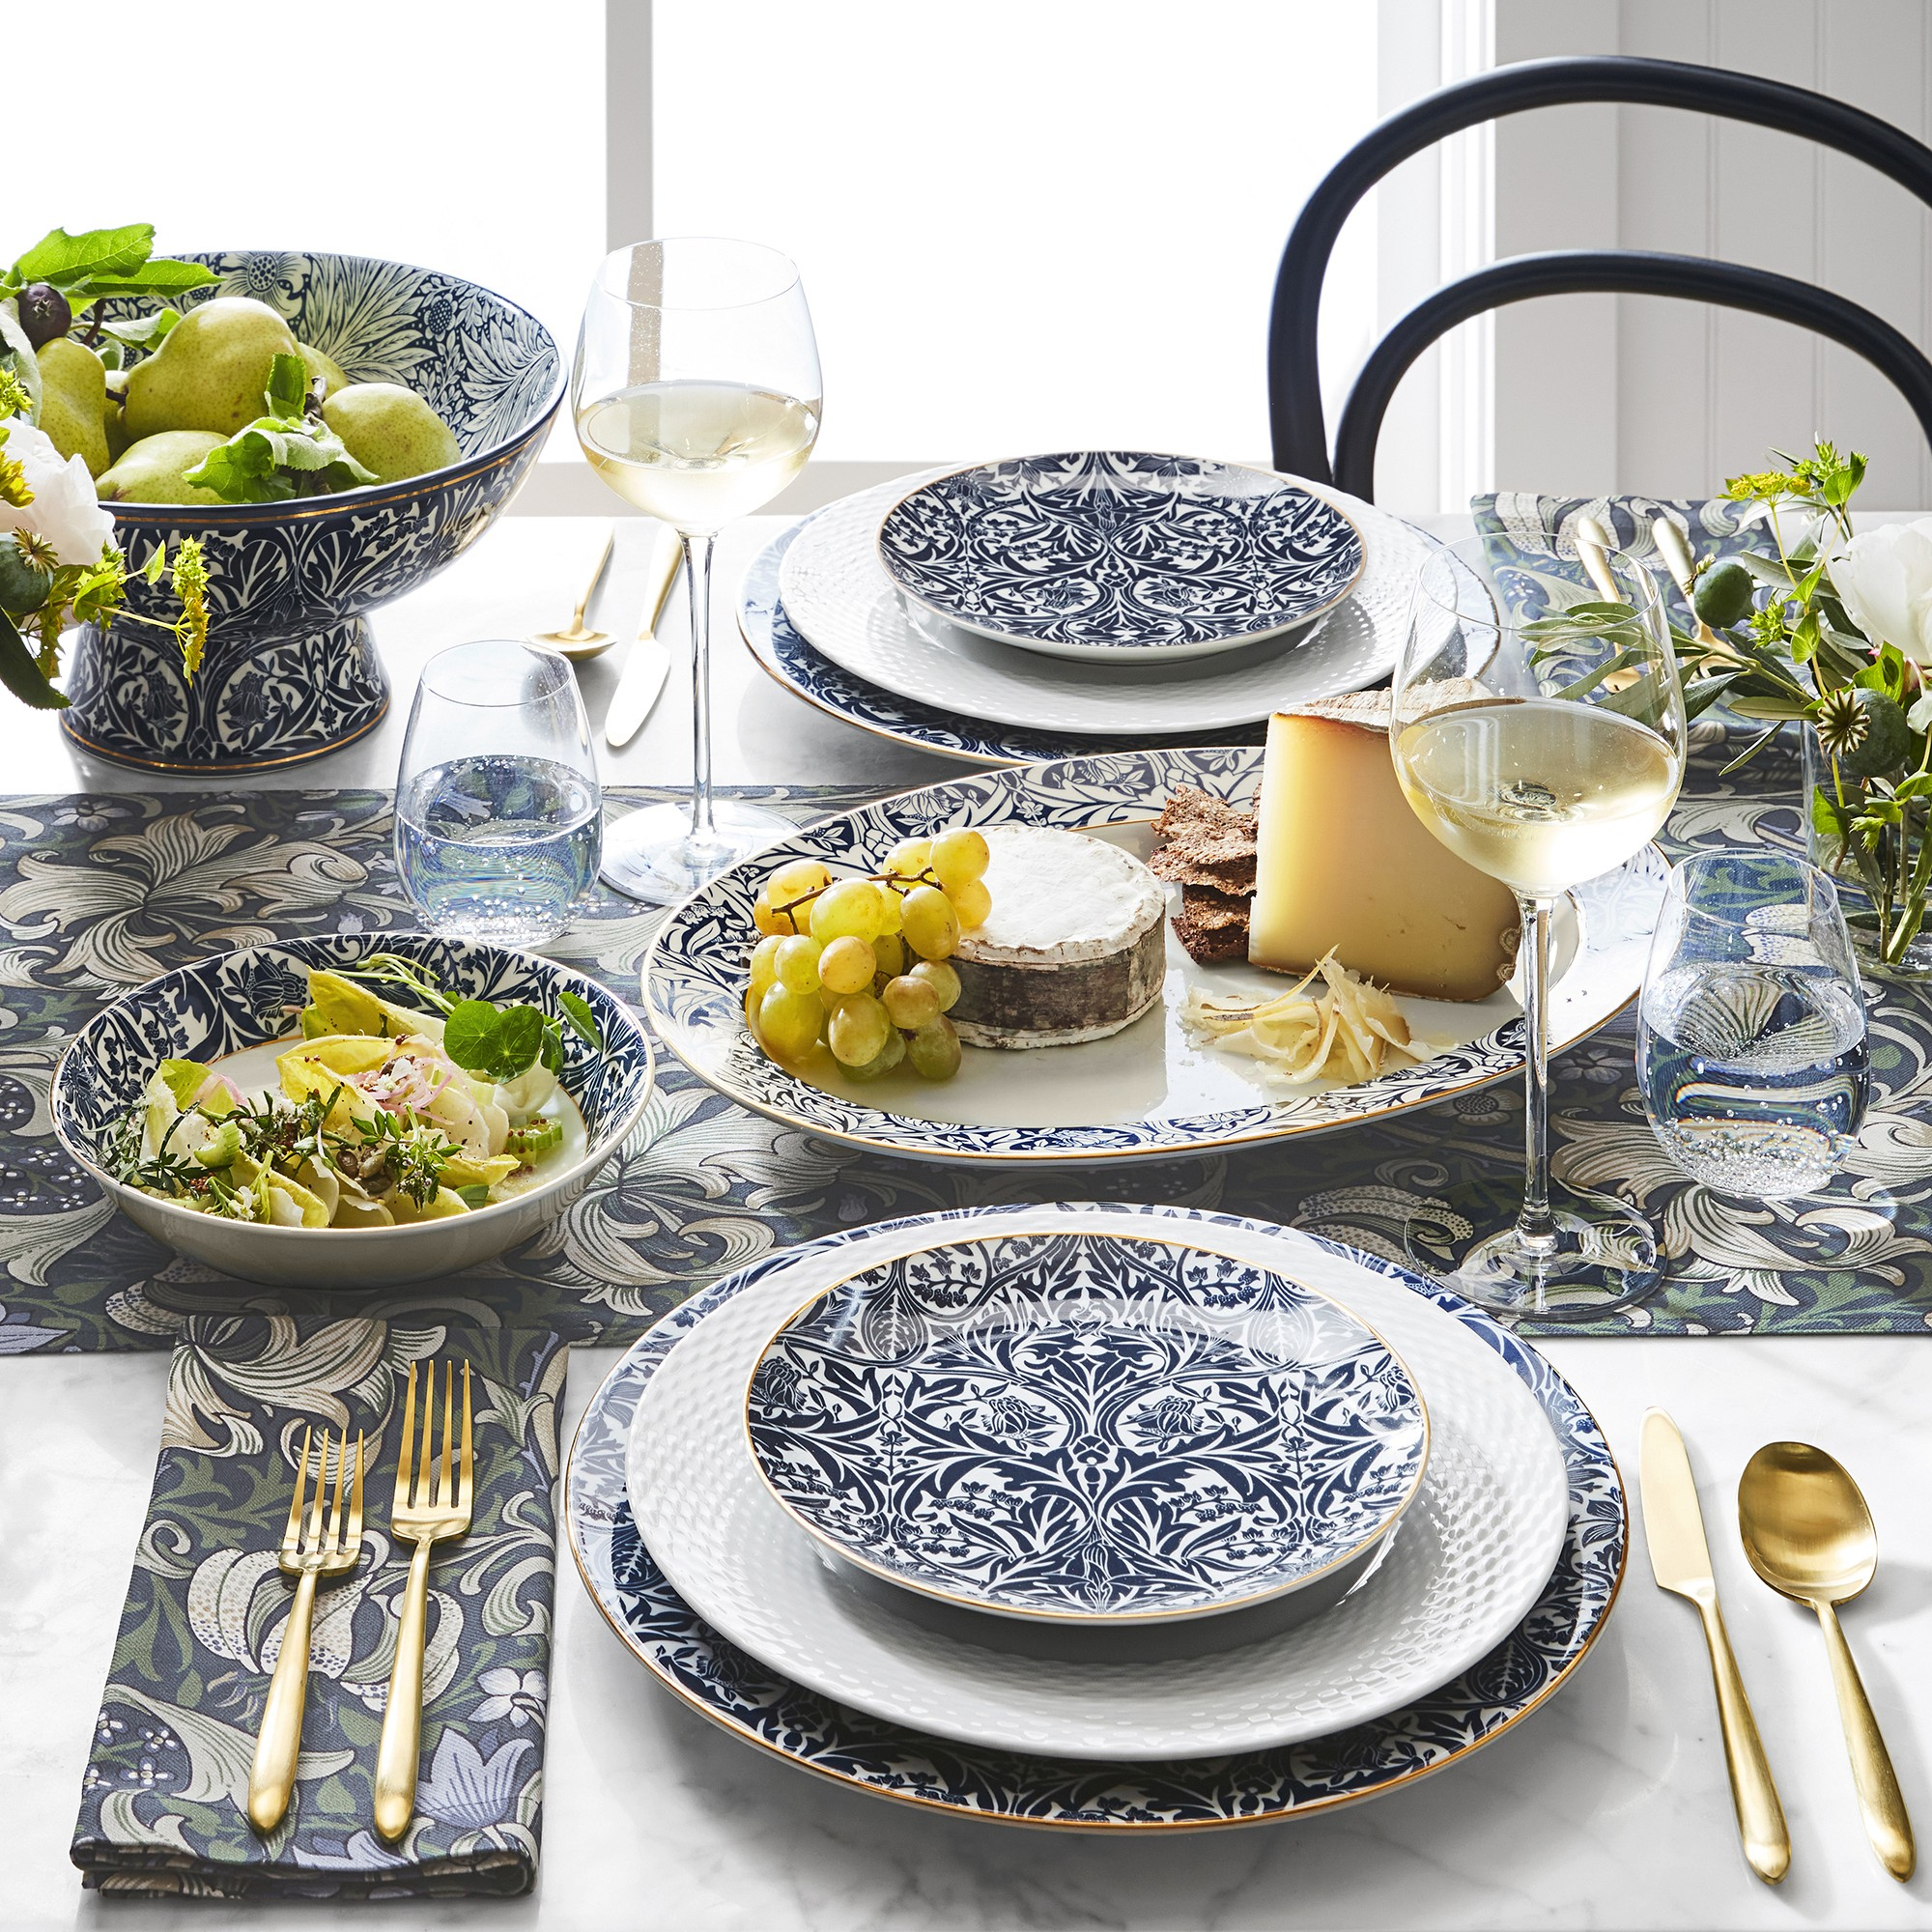 WILLIAMS SONOMA LAUNCHES NEW COLLABORATION WITH MORRIS & CO